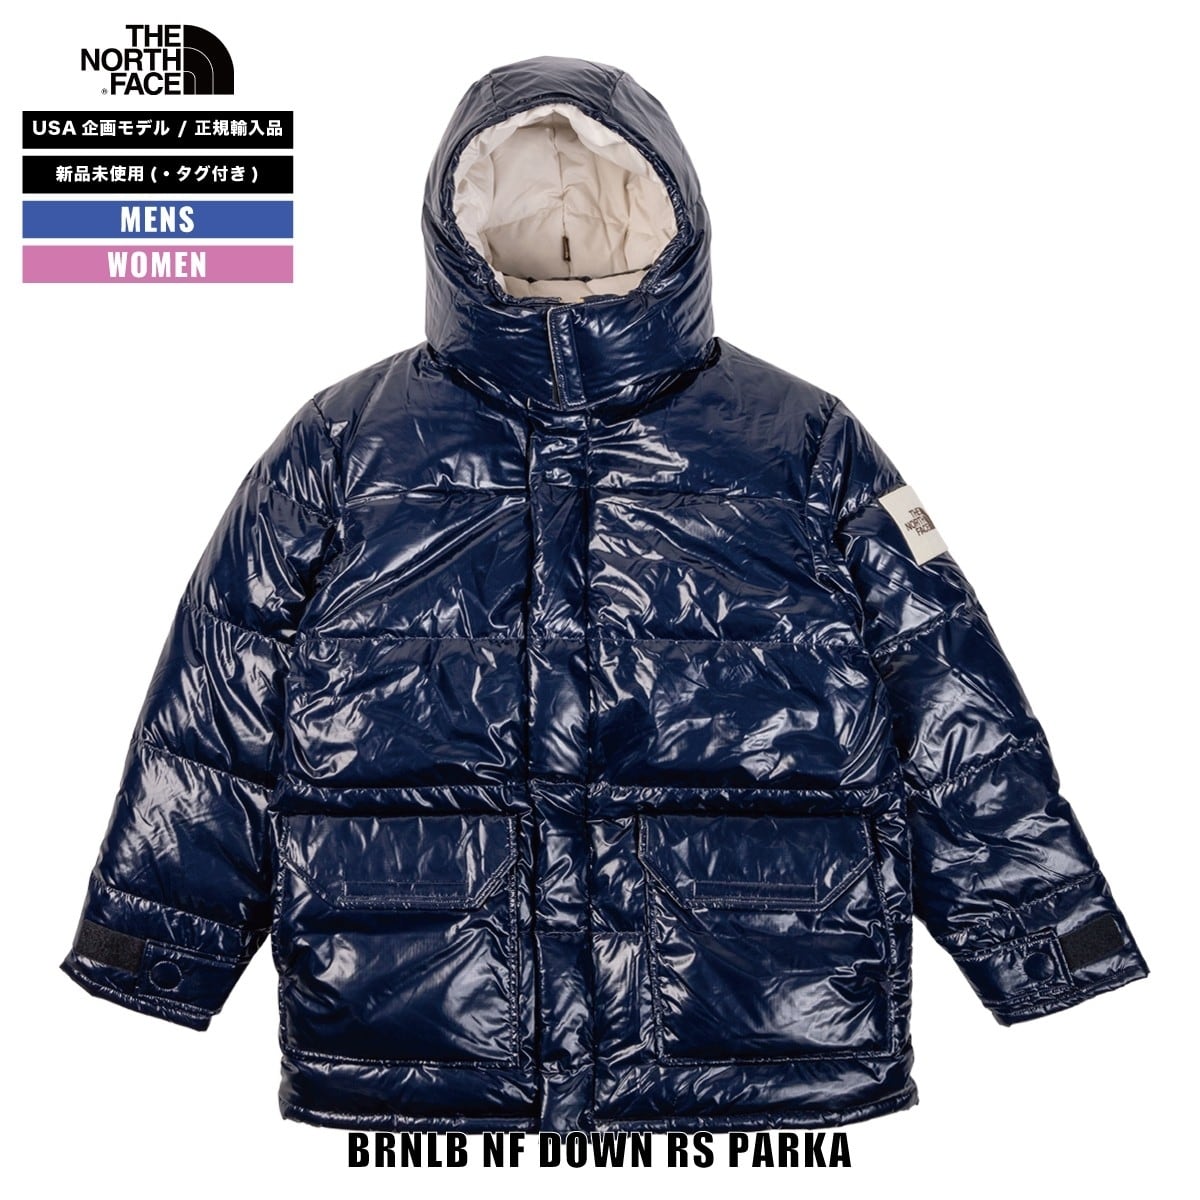 The North Faceノースフェイス　新品未使用タグ付き